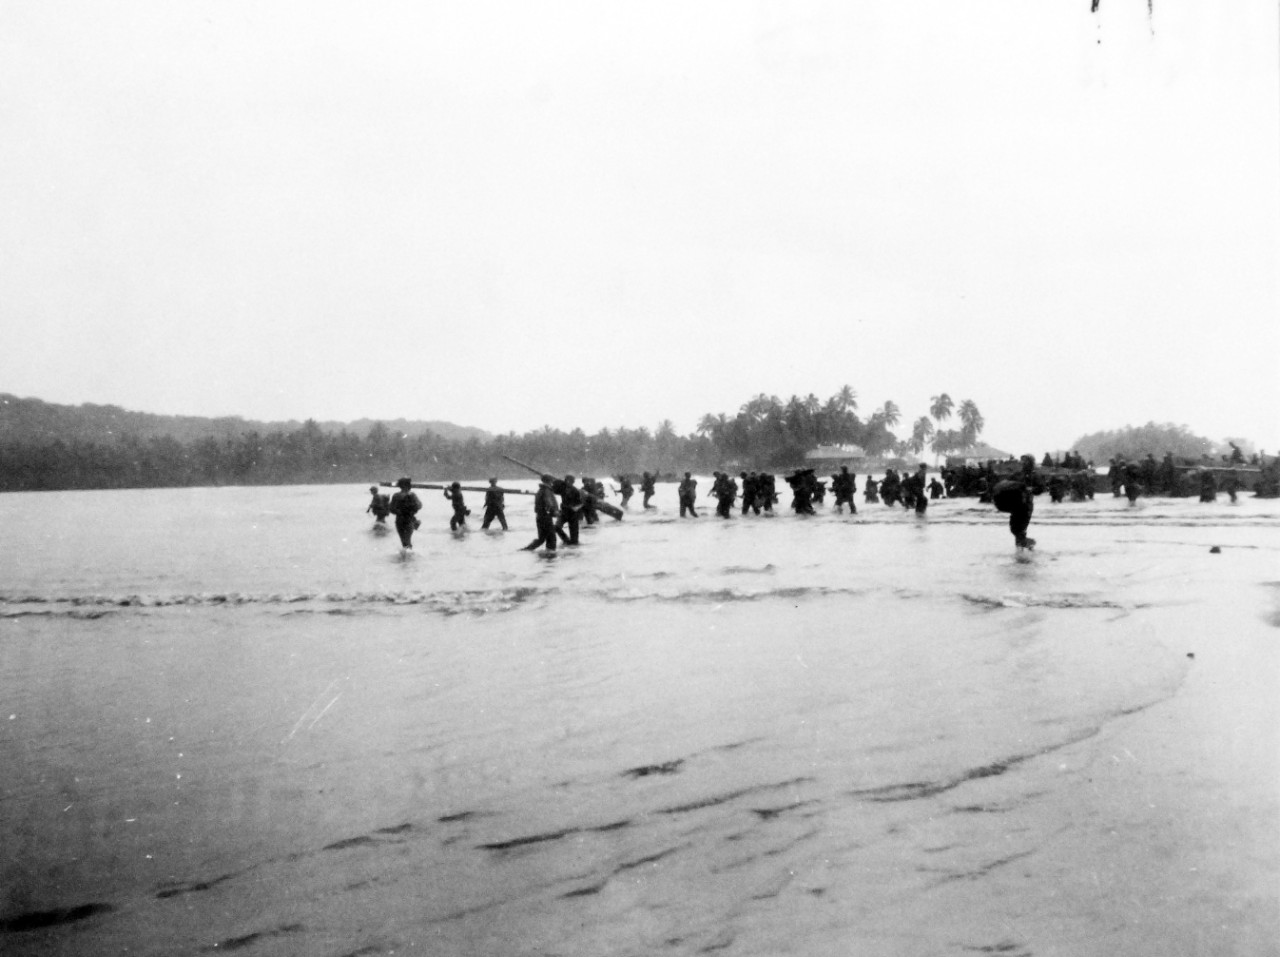 80-G-52578:  Rendova Island Invasion, June 30, 1943.   Men going ashore on Rendova Island, Solomon Islands, during beginning of invasion.   Official U.S. Navy Photograph, now in the collections of the National Archives.  (2018/04/04).